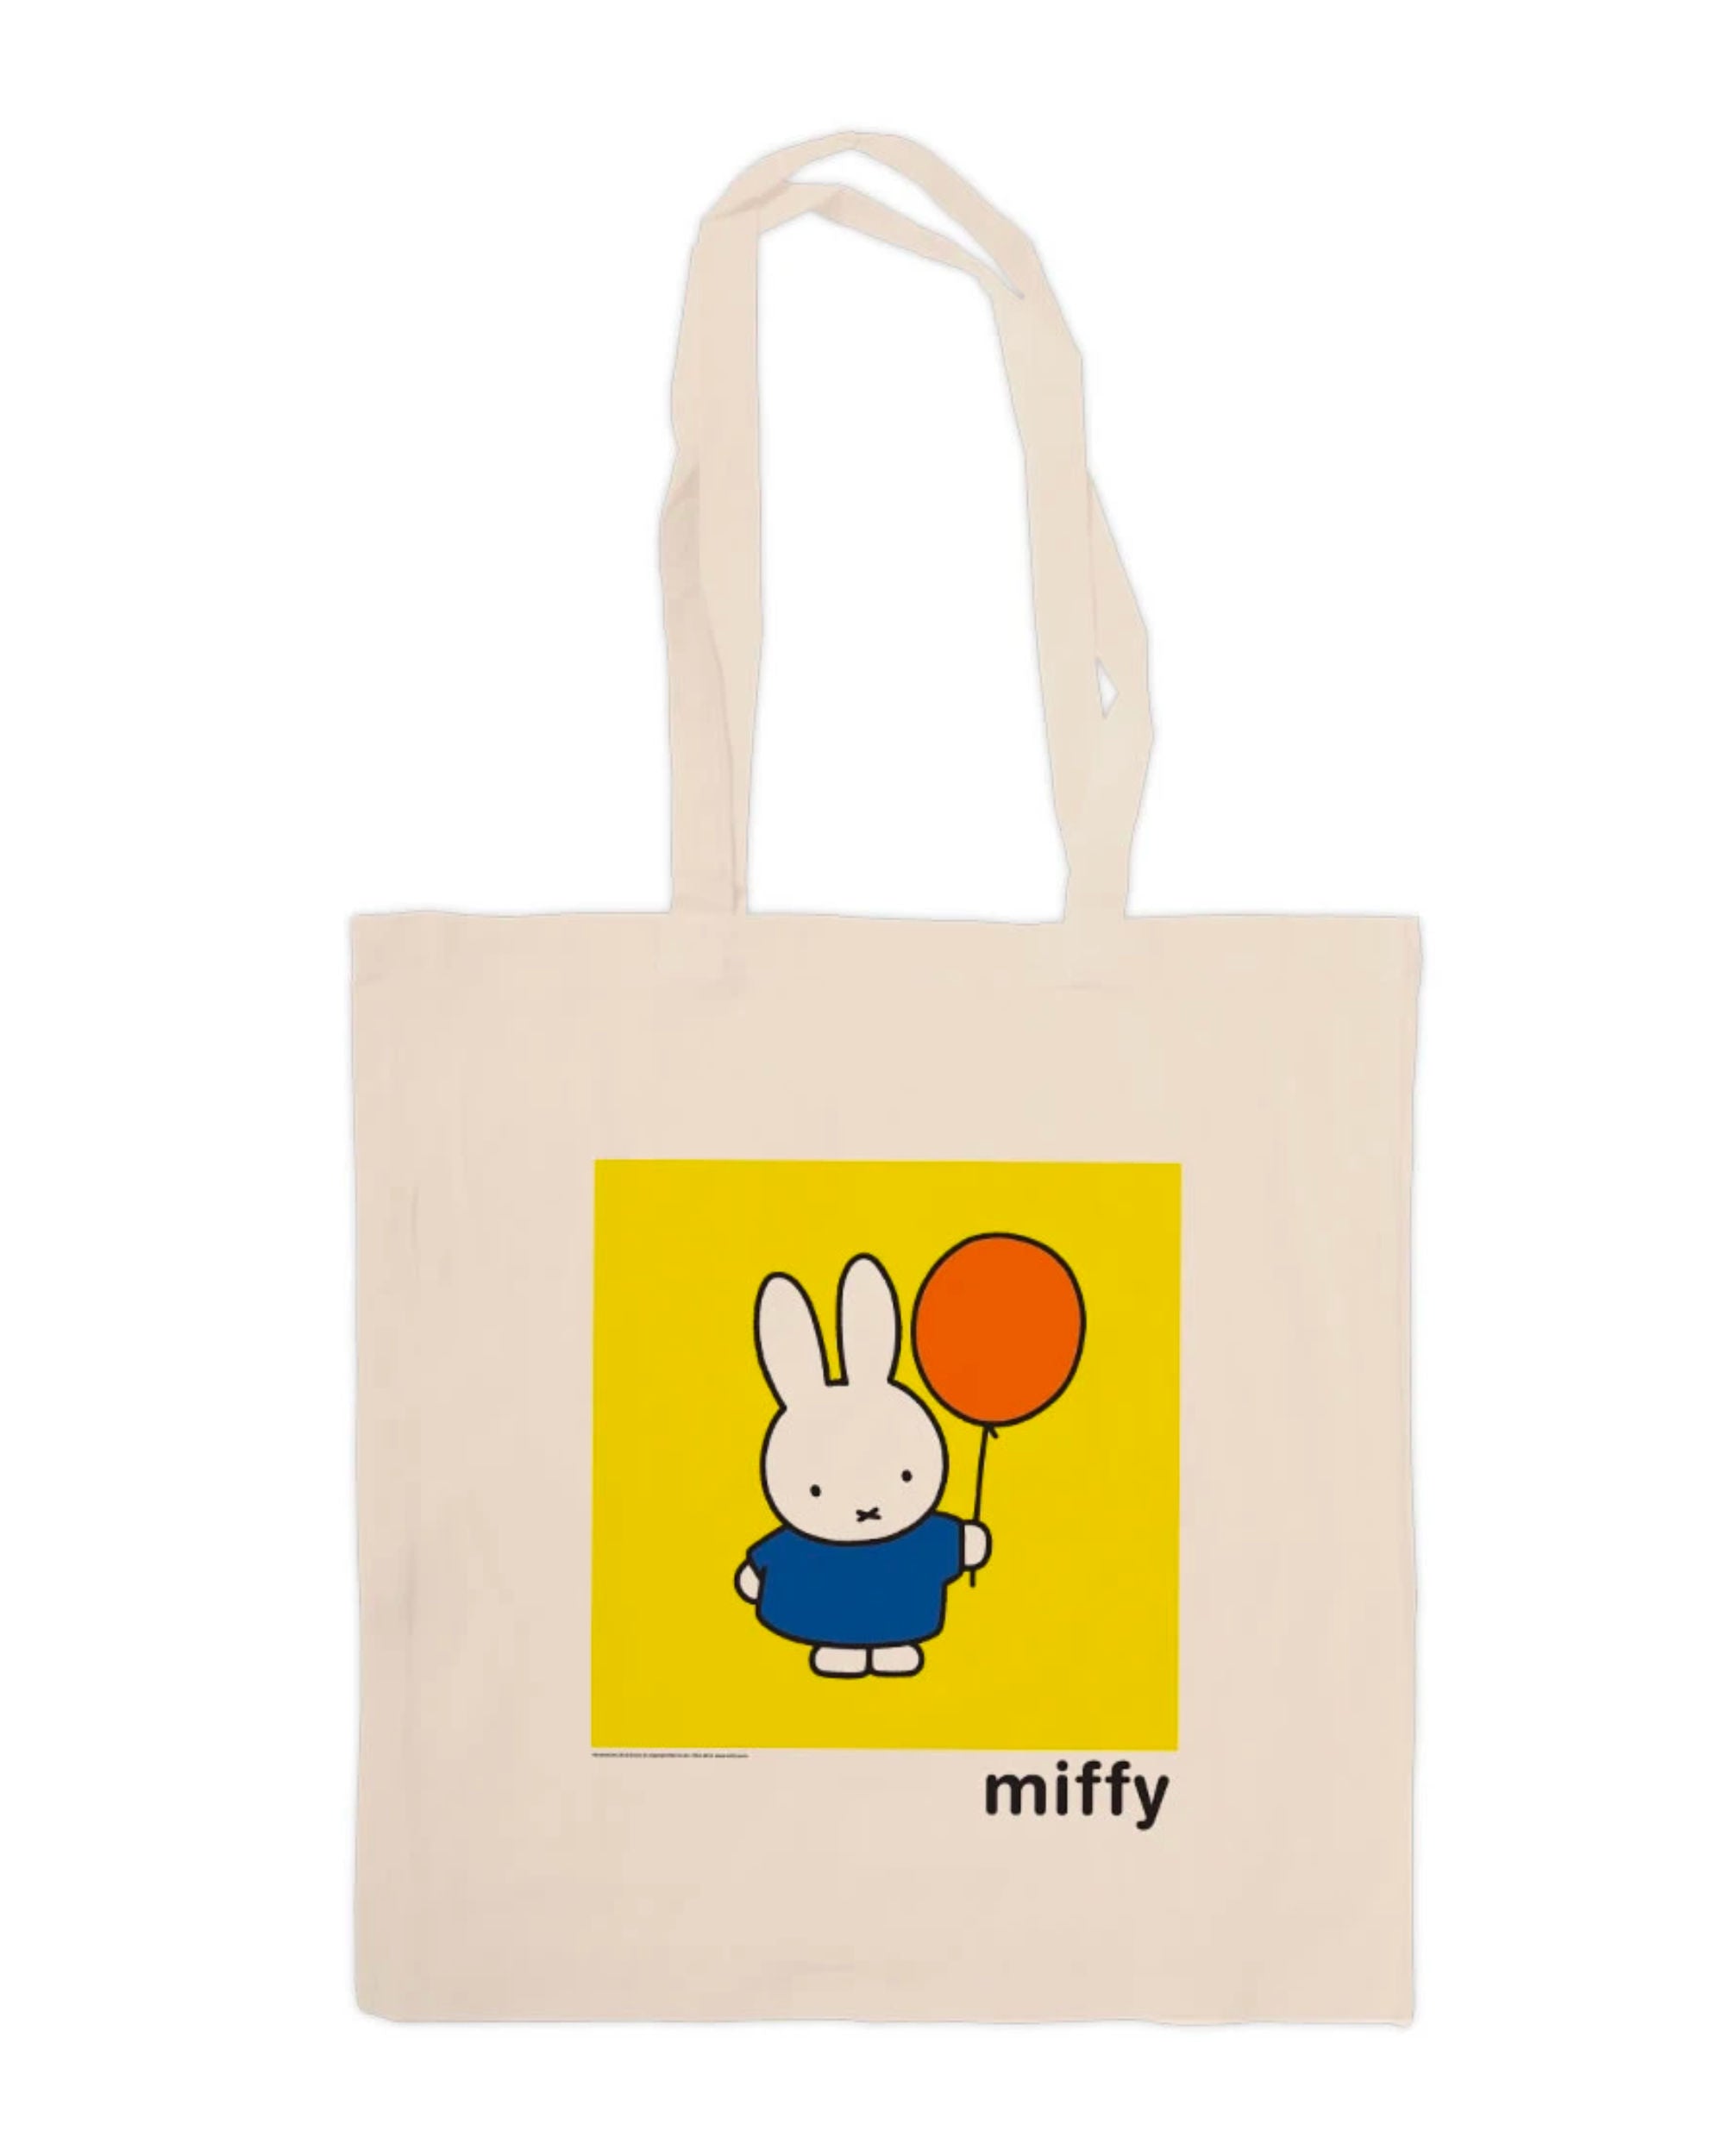 Star Edition Miffy canvas tote bag, miffy holding a balloon